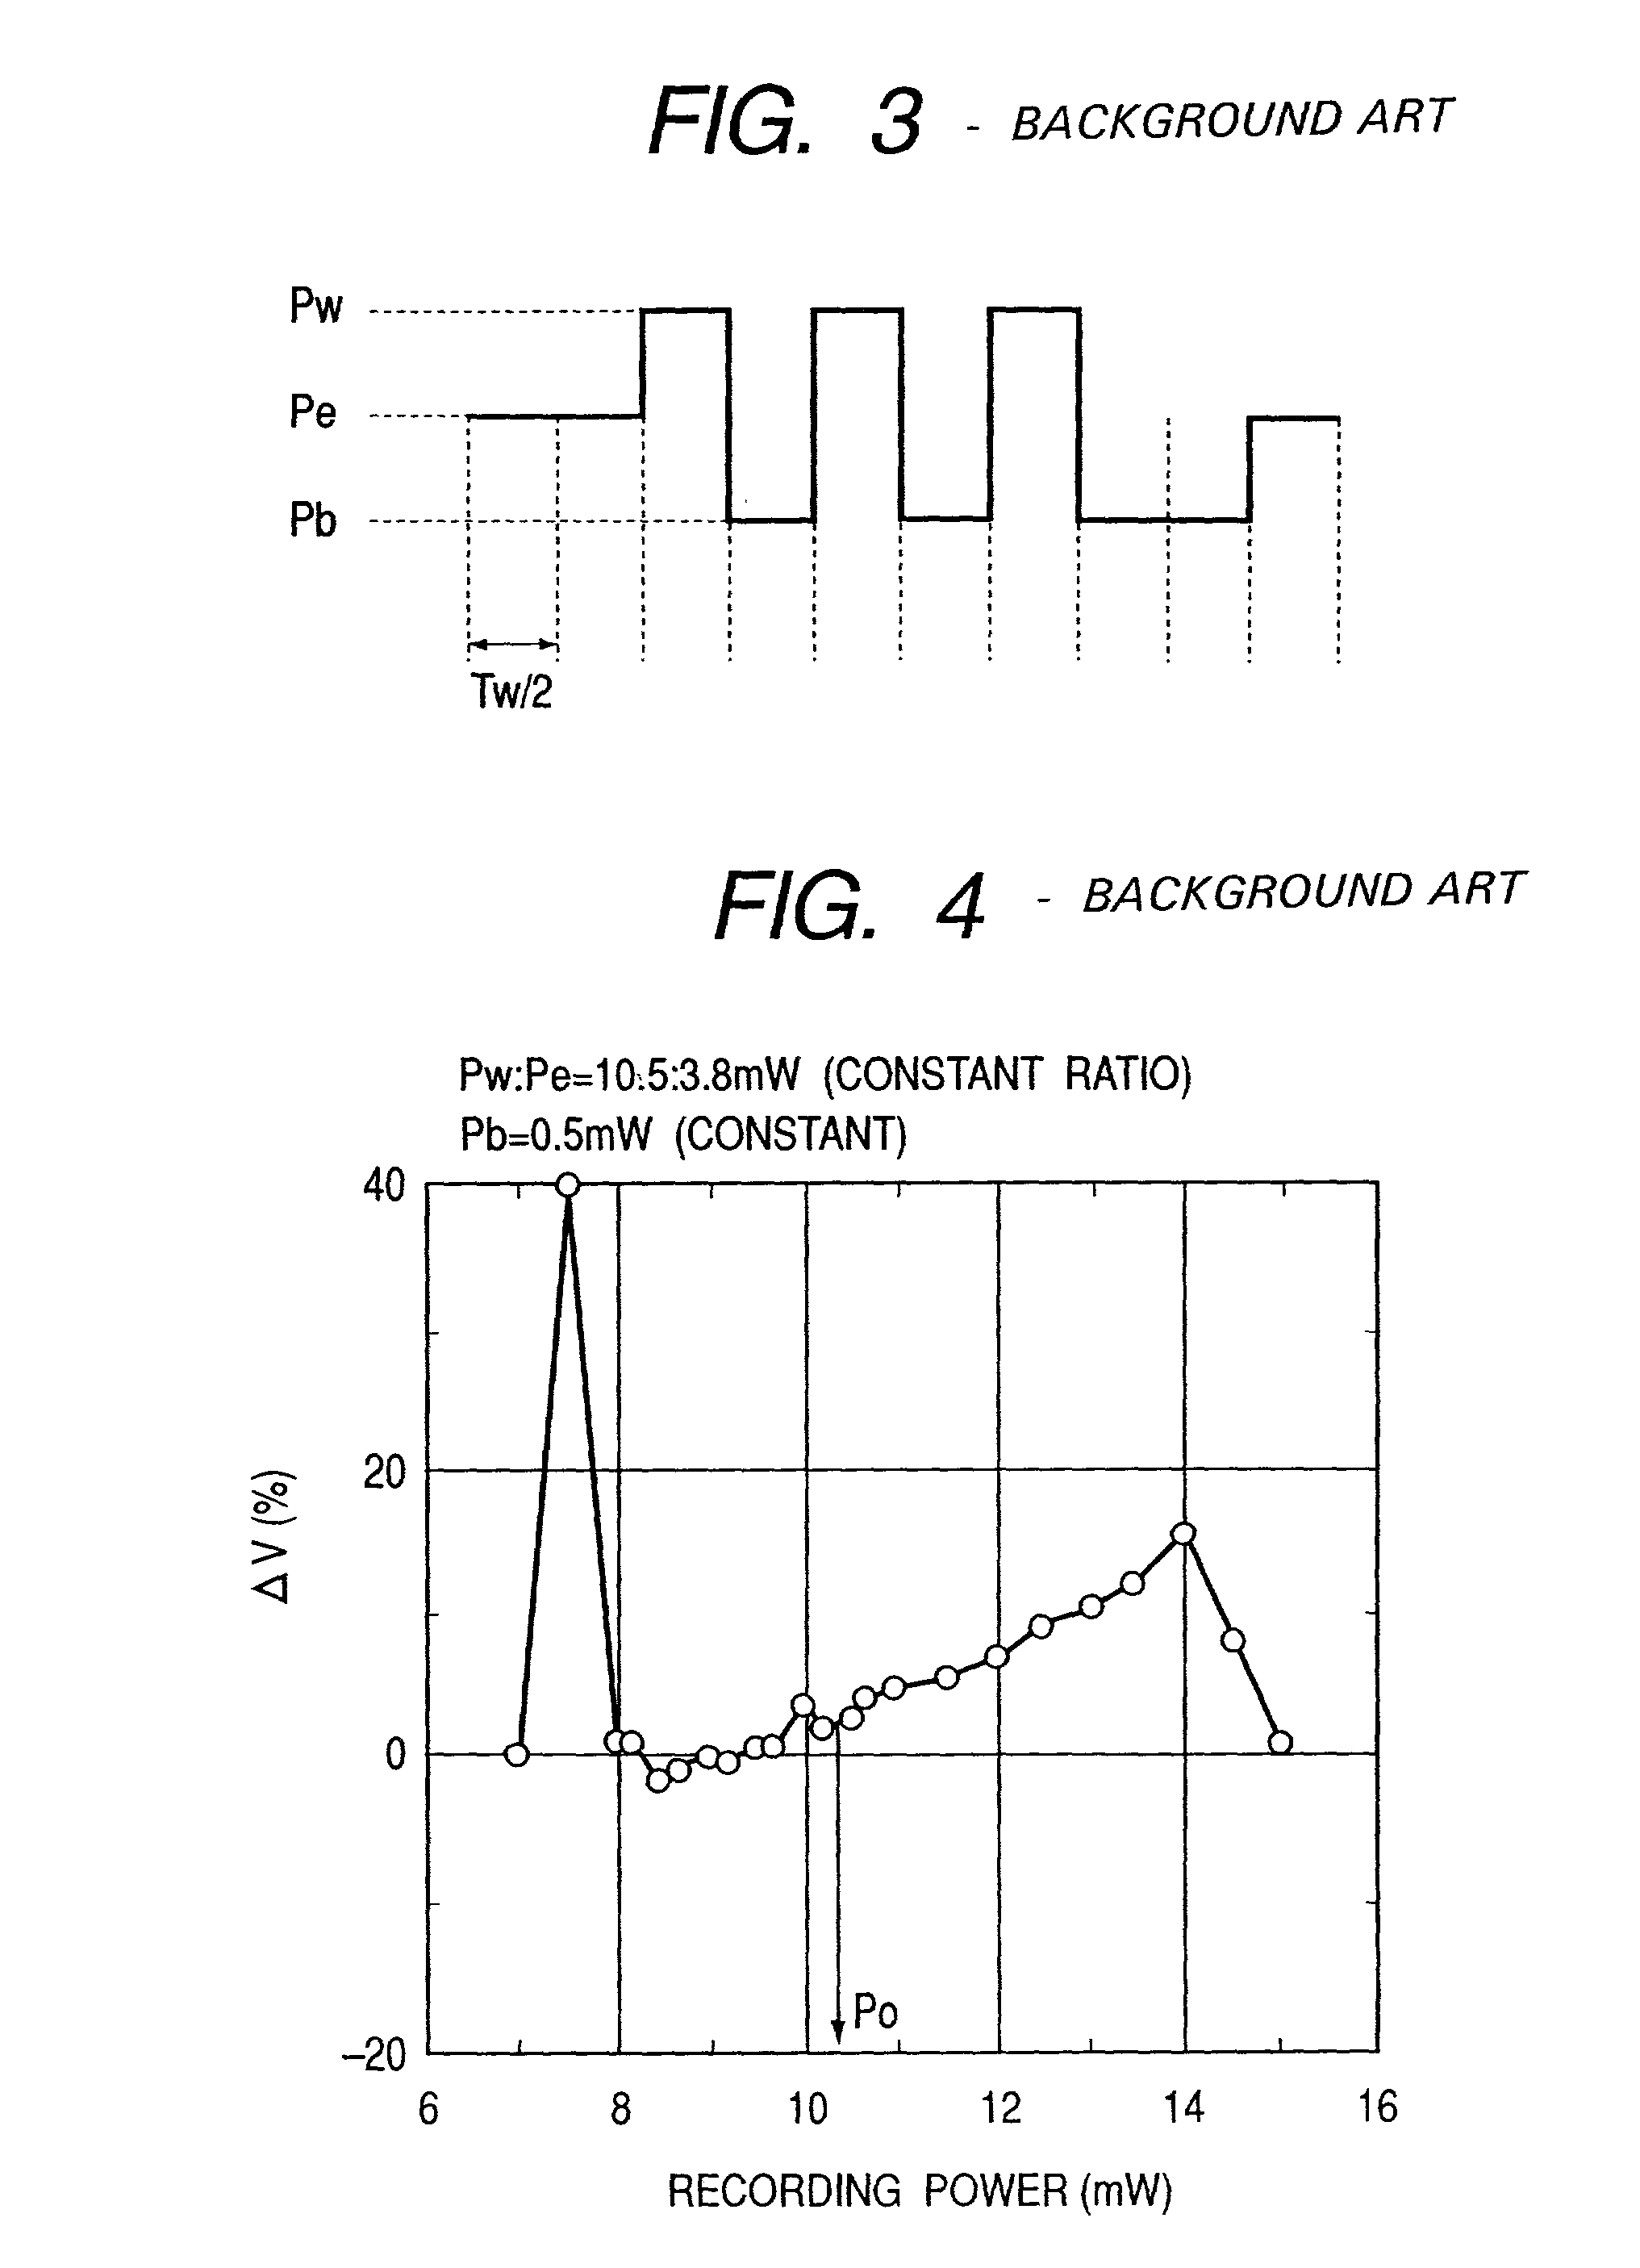 Arrangements for using detected phase differences for setting laser power levels